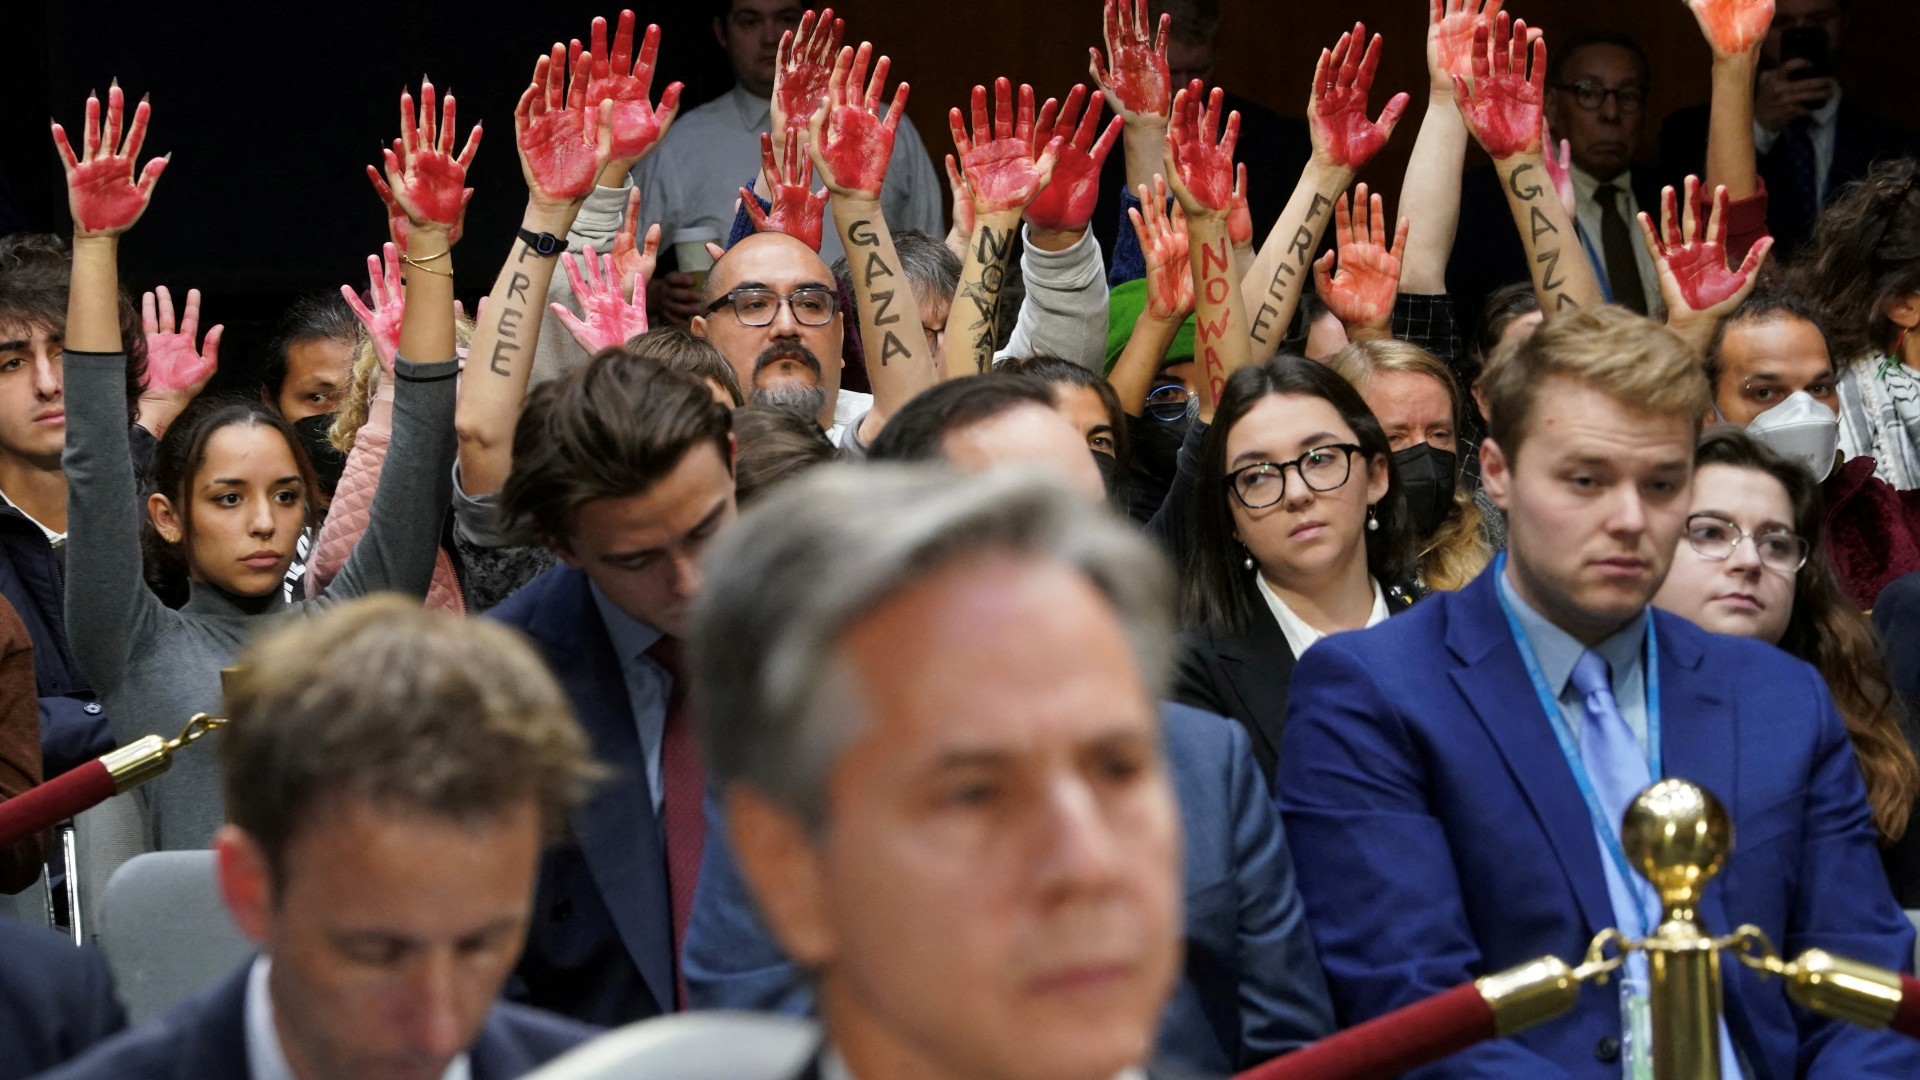 Anti-war protesters raise their "bloody" hands behind US Secretary of State Antony Blinken during a Senate Appropriations Committee hearing on 31 October (Reuters)